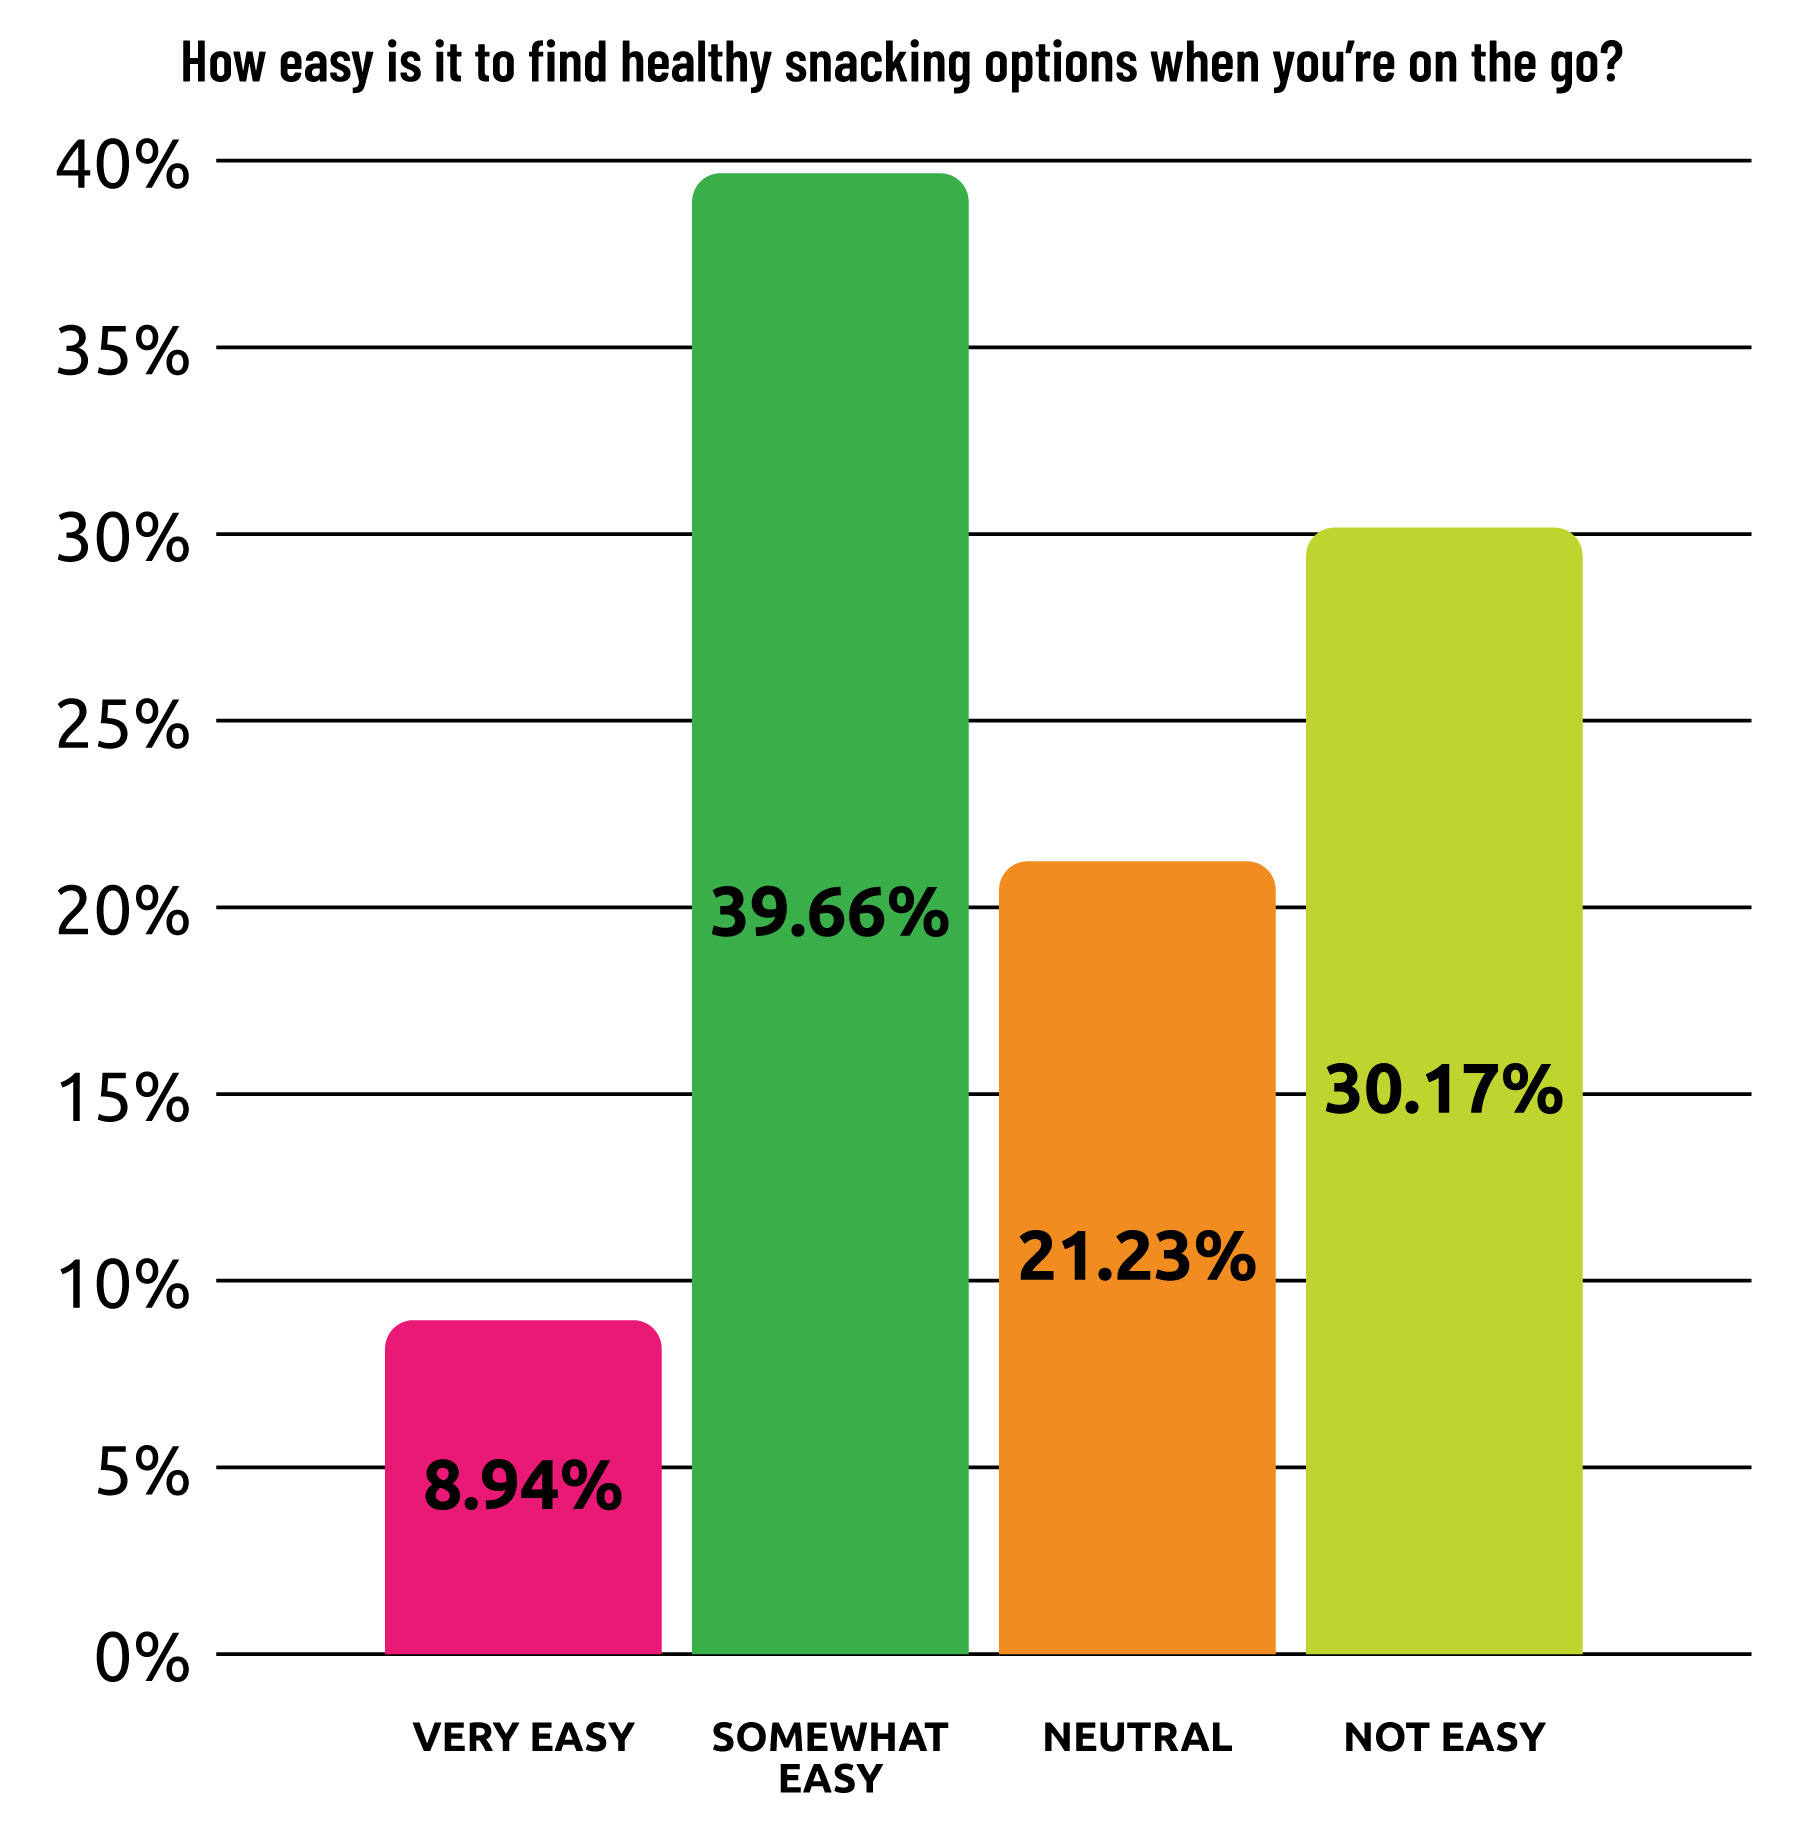 Bar graph showing consumers opinion on how easy it is to find healthy snacking options while on the go. 8.94% said very easy. 39.66% said somewhat easy. 21.23% said they were neutral on the subject. And 30.17% said it is not easy to find healthy snacking options while on the go.